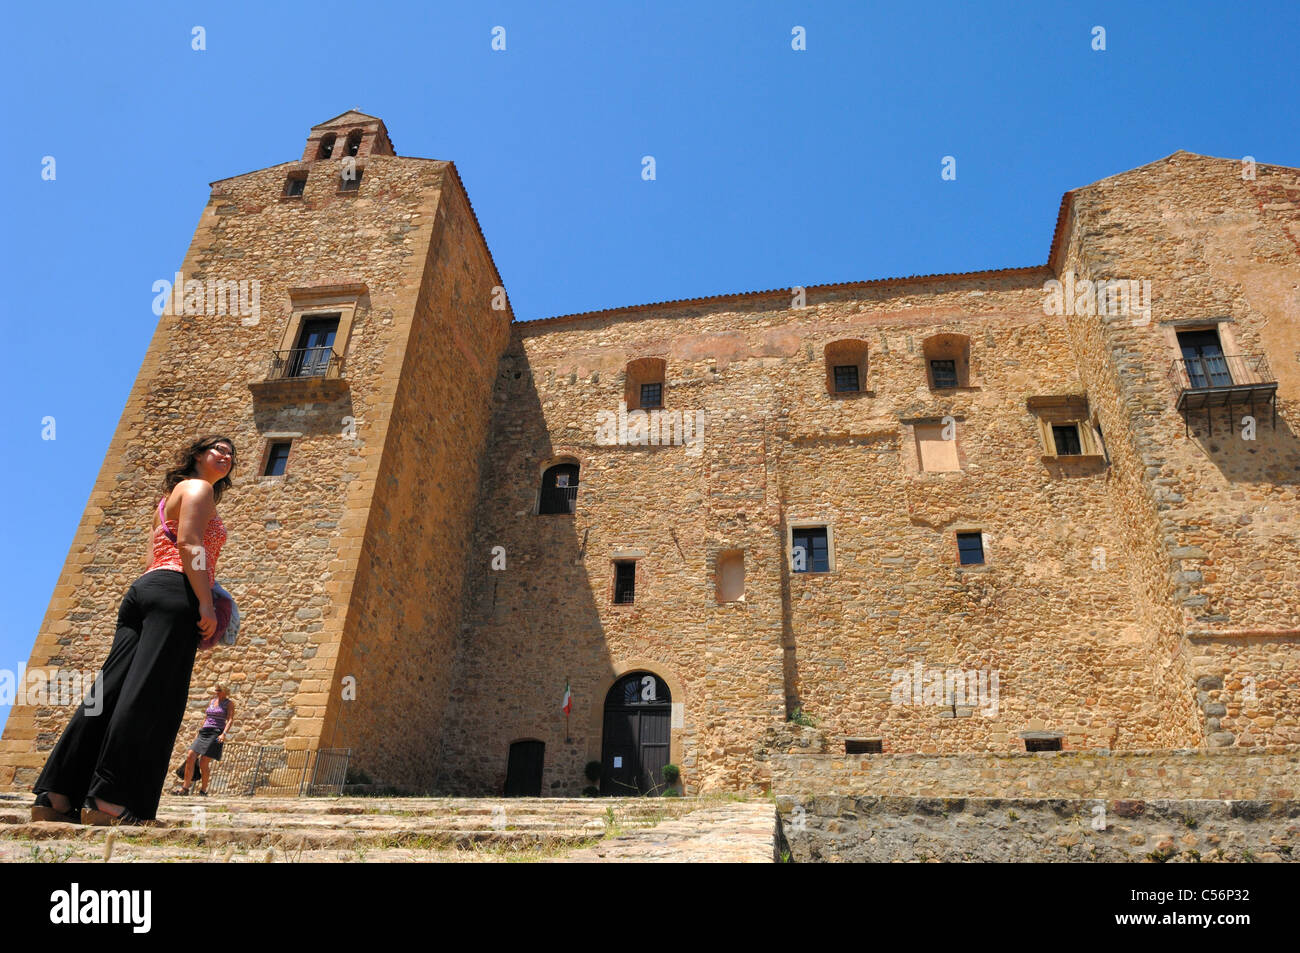 The medieval castle in Castelbuono Stock Photo